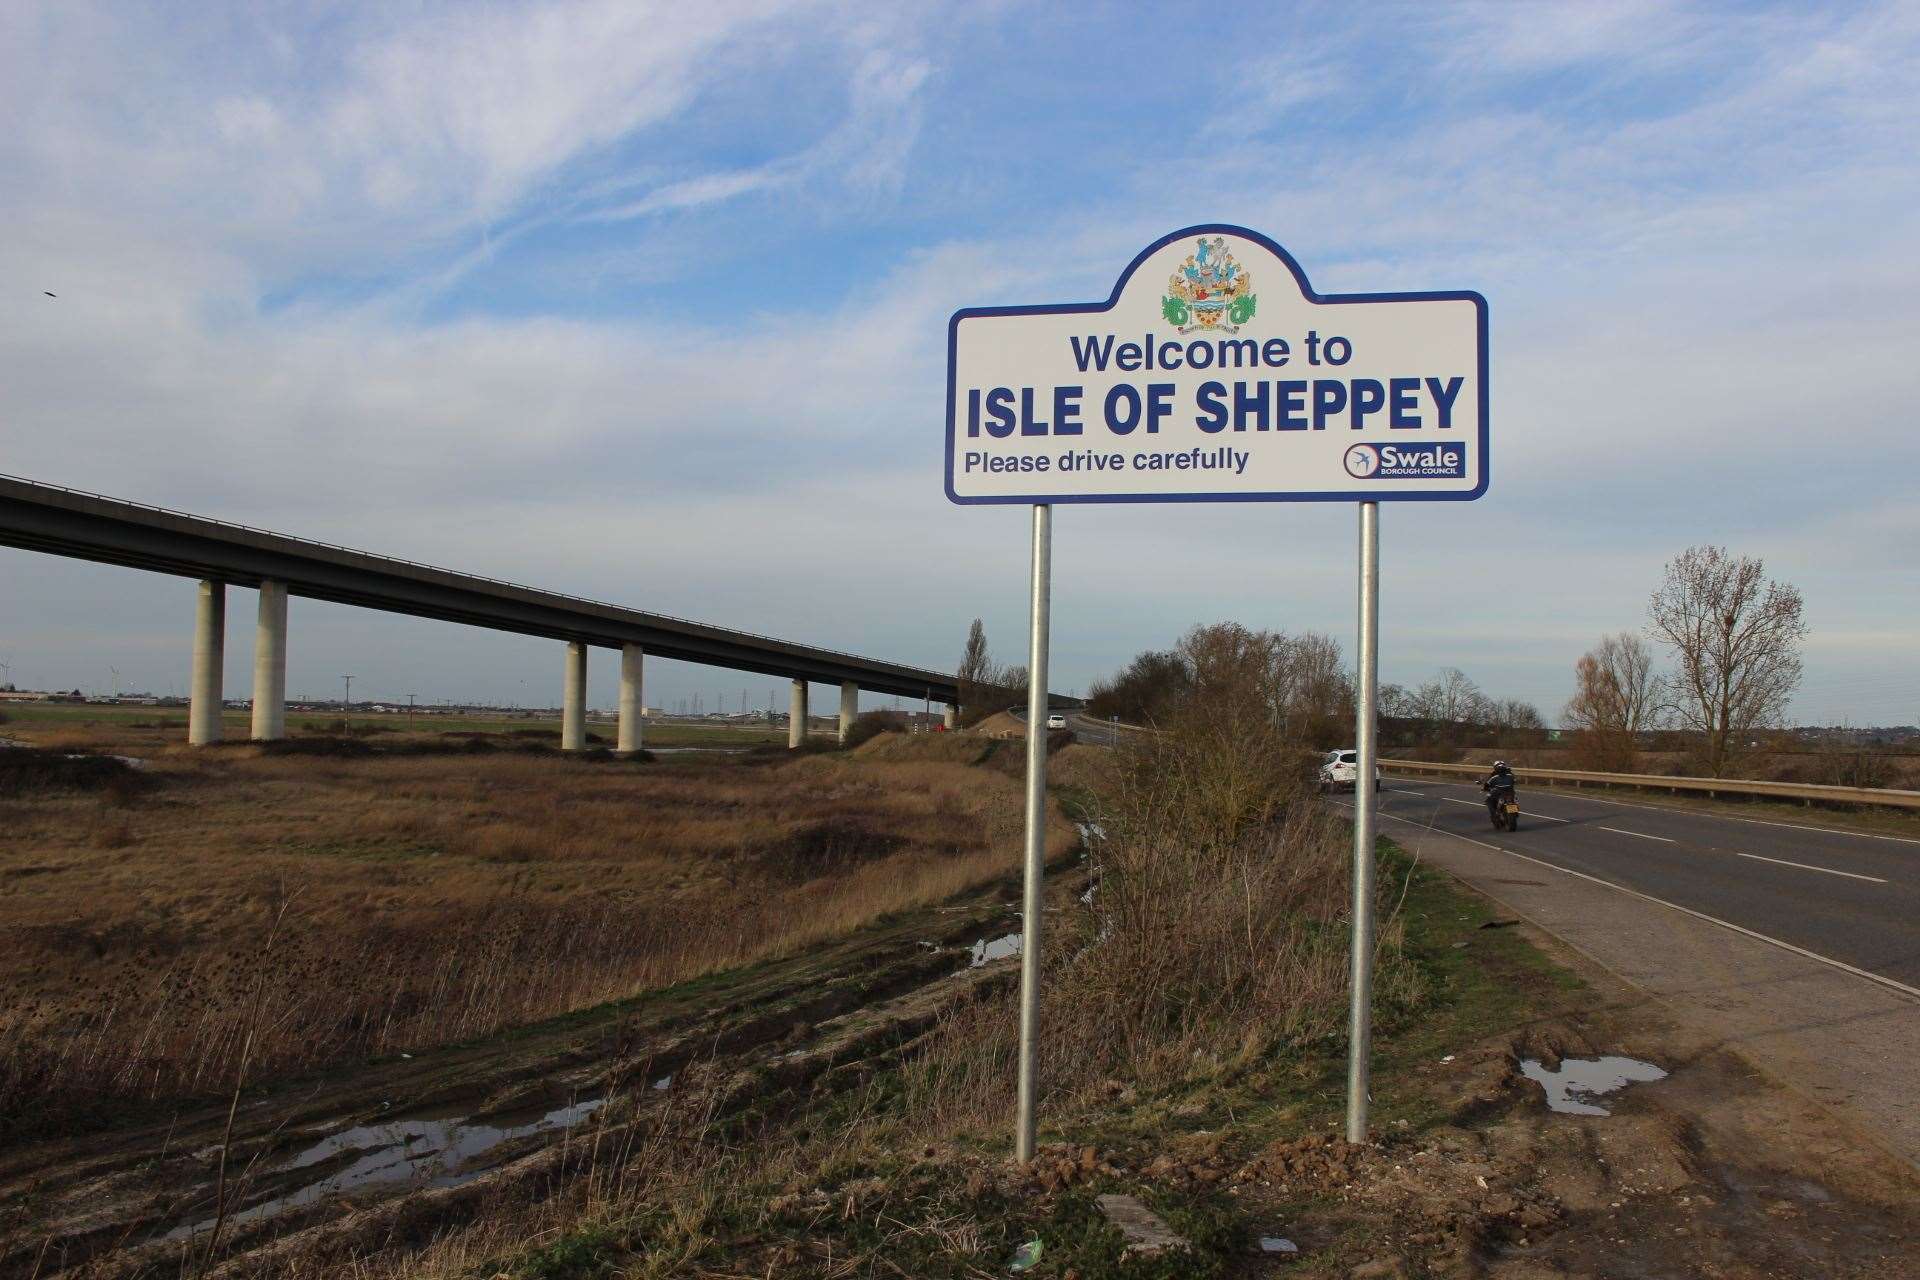 Welcome to Sheppey sign by the Sheppey Crossing